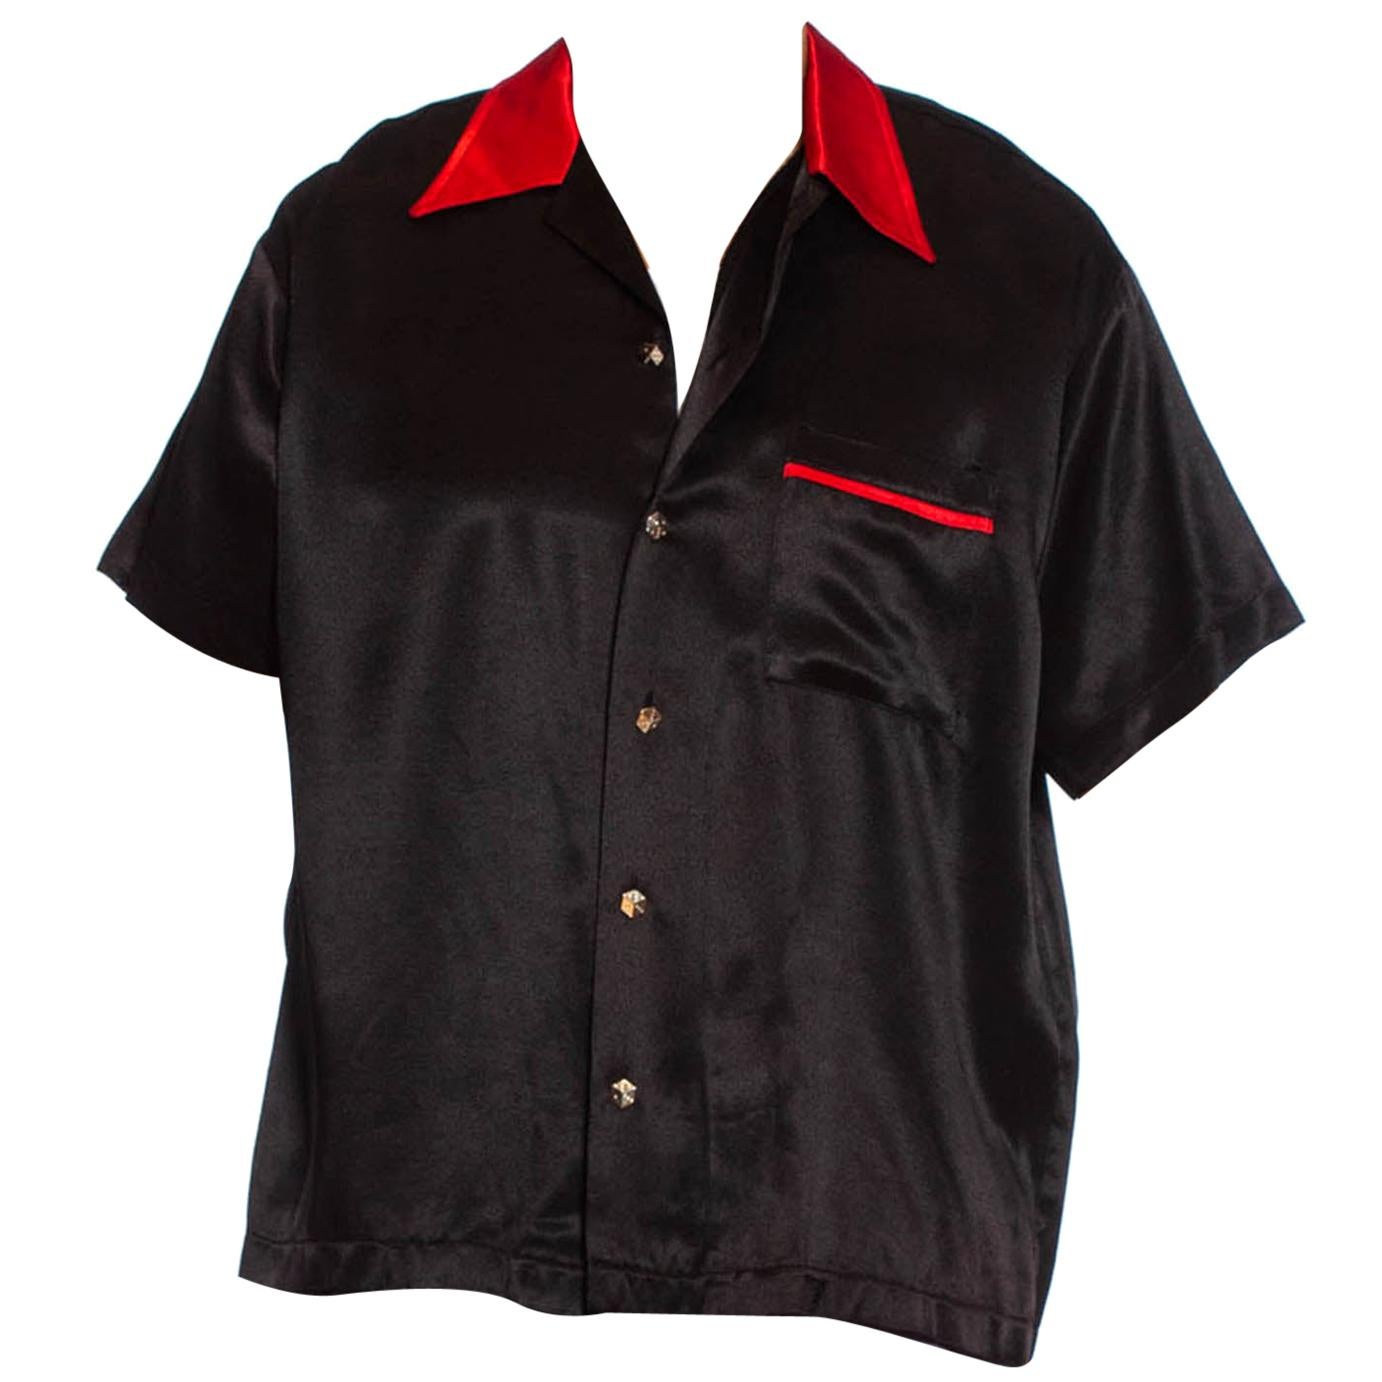 1990S Black & Red Rayon Satin "Pimp Daddy" Rockabilly Men's Shirt With Dice Butt